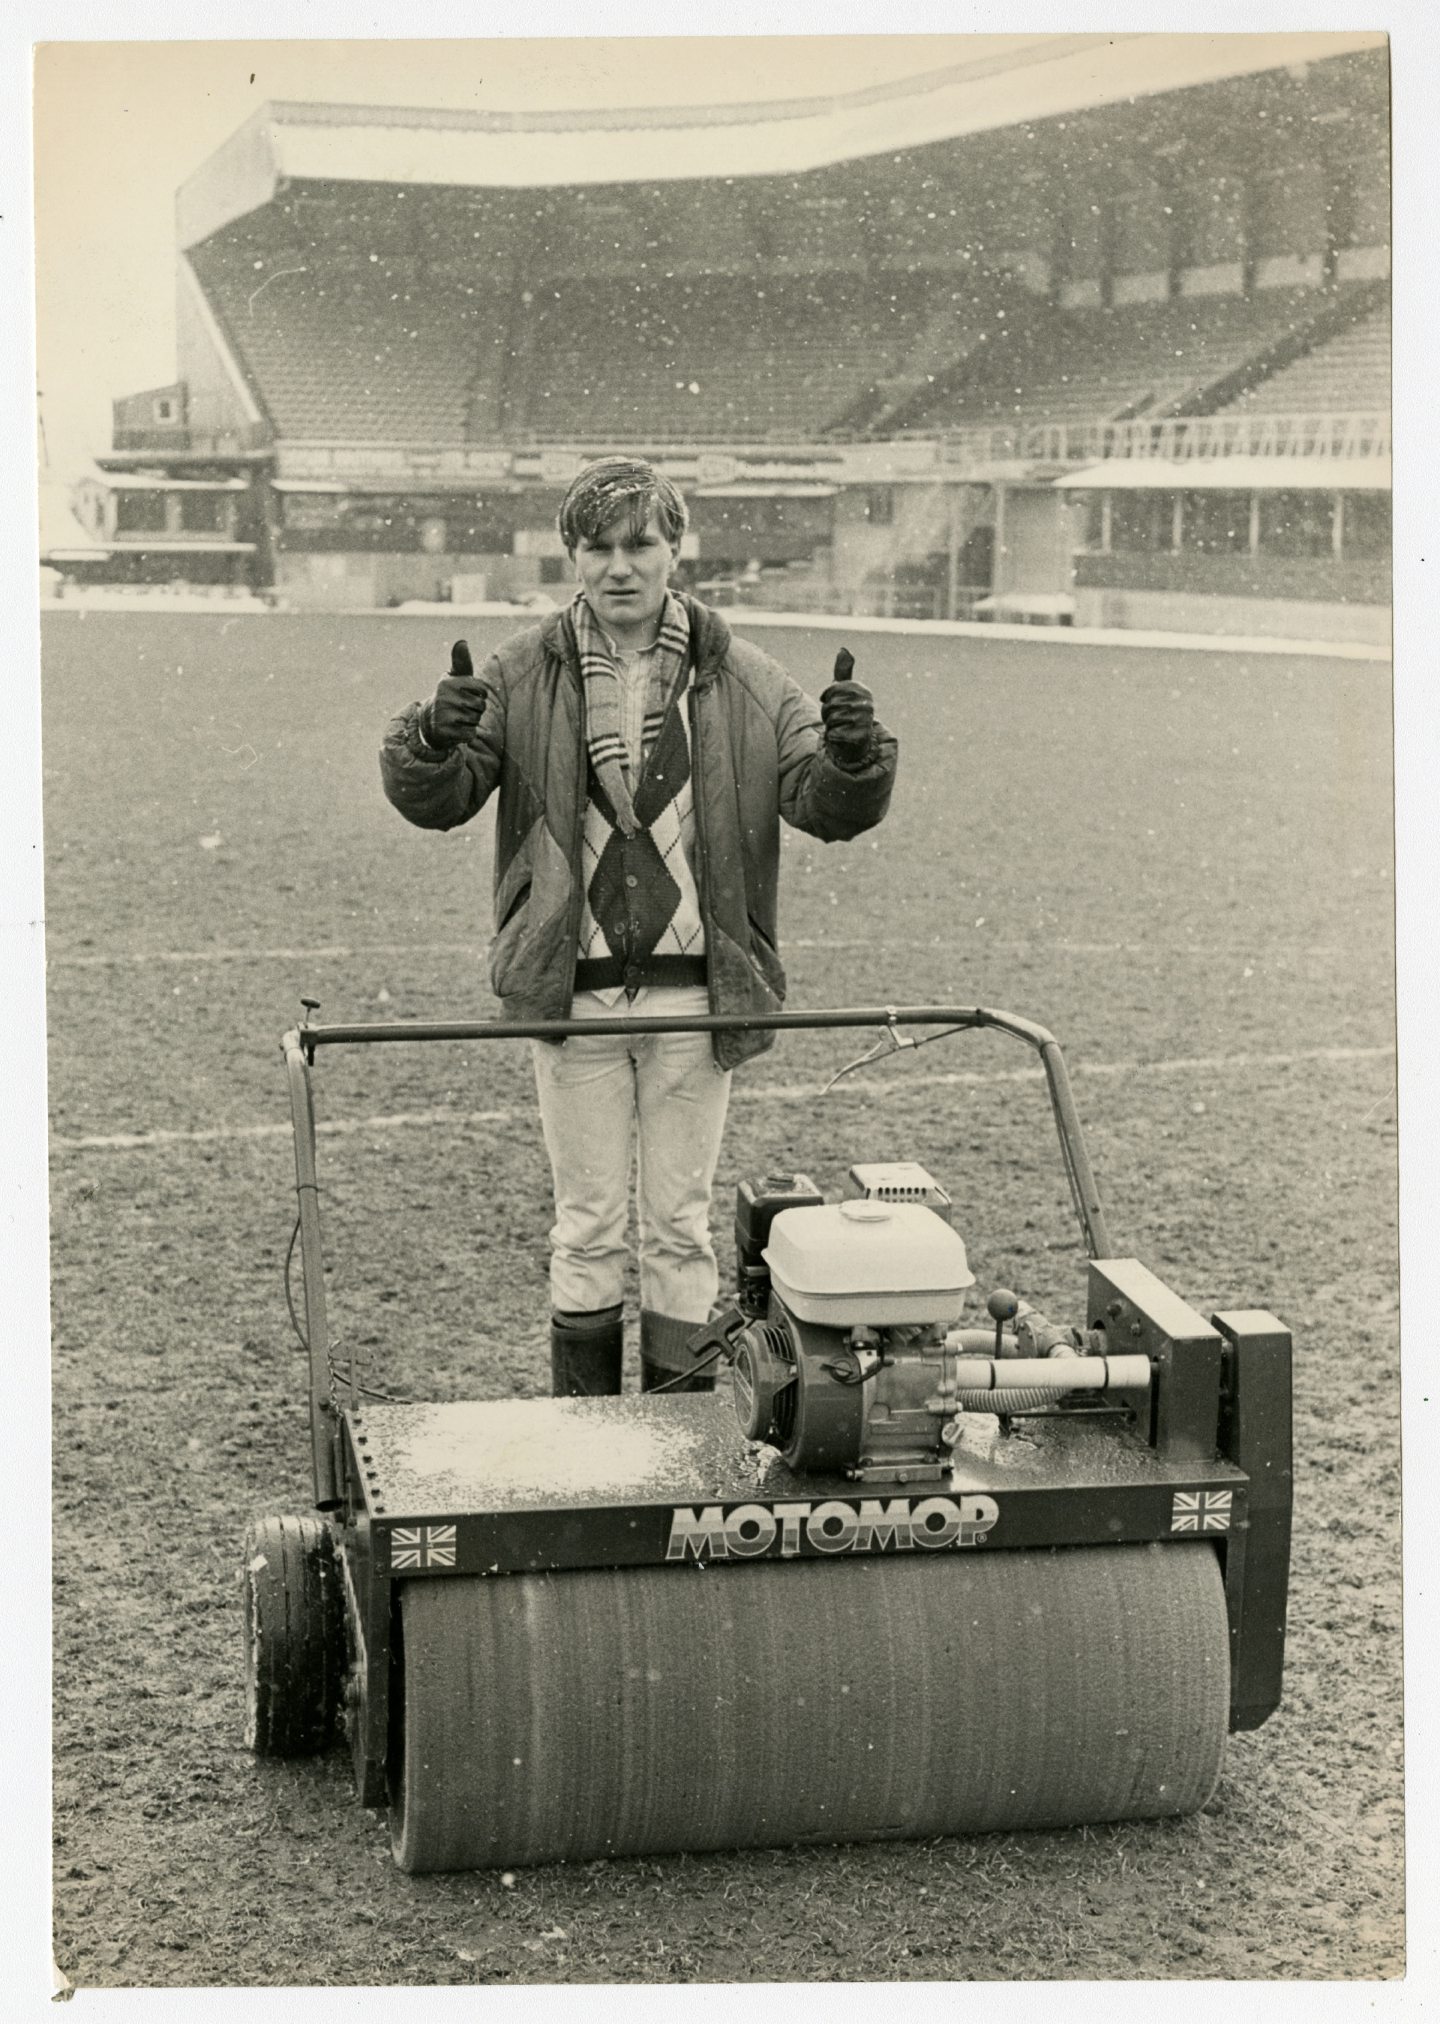 Tannadice groundsman James Fox giving the thumbs up after going over the the pitch with the club's motomop in February 1986.